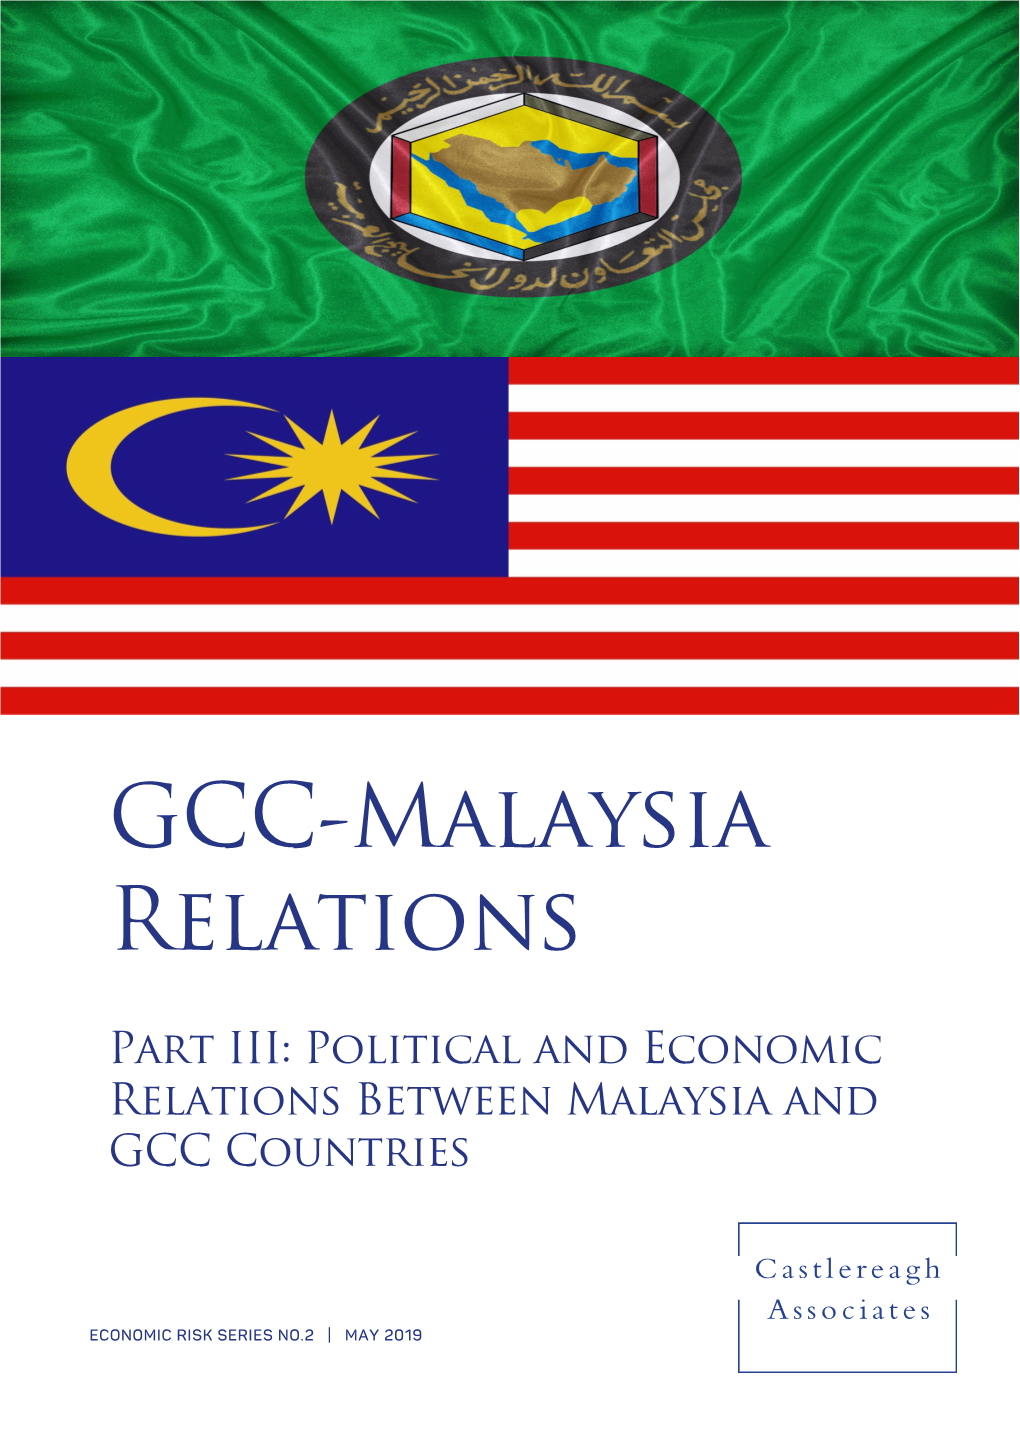 Malaysia Report Focuses on the Bilateral Relations That Malaysia Has Enjoyed with GCC Countries